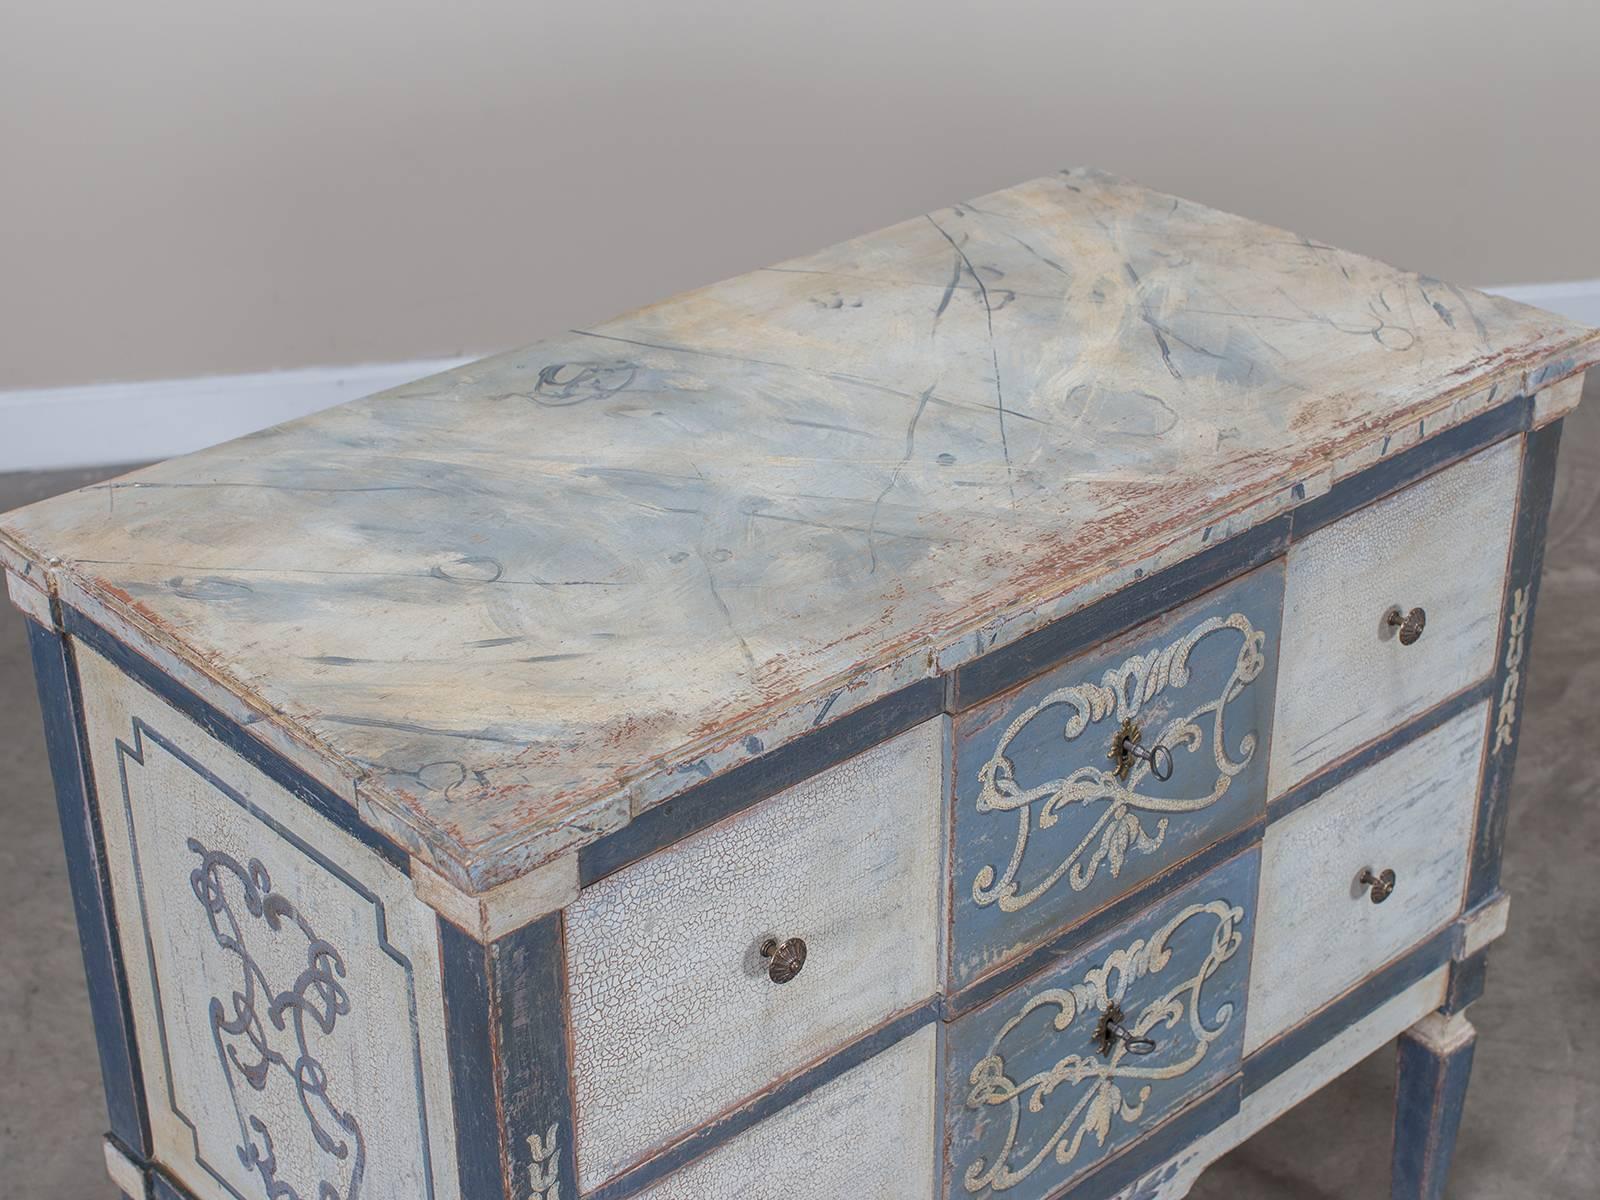 Receive our new selections direct from 1stdibs by email each week. Please click Follow Dealer below and see them first!

This pair of painted pine chest of drawers showcases the continuing appeal of color when used in an interior. The elegant